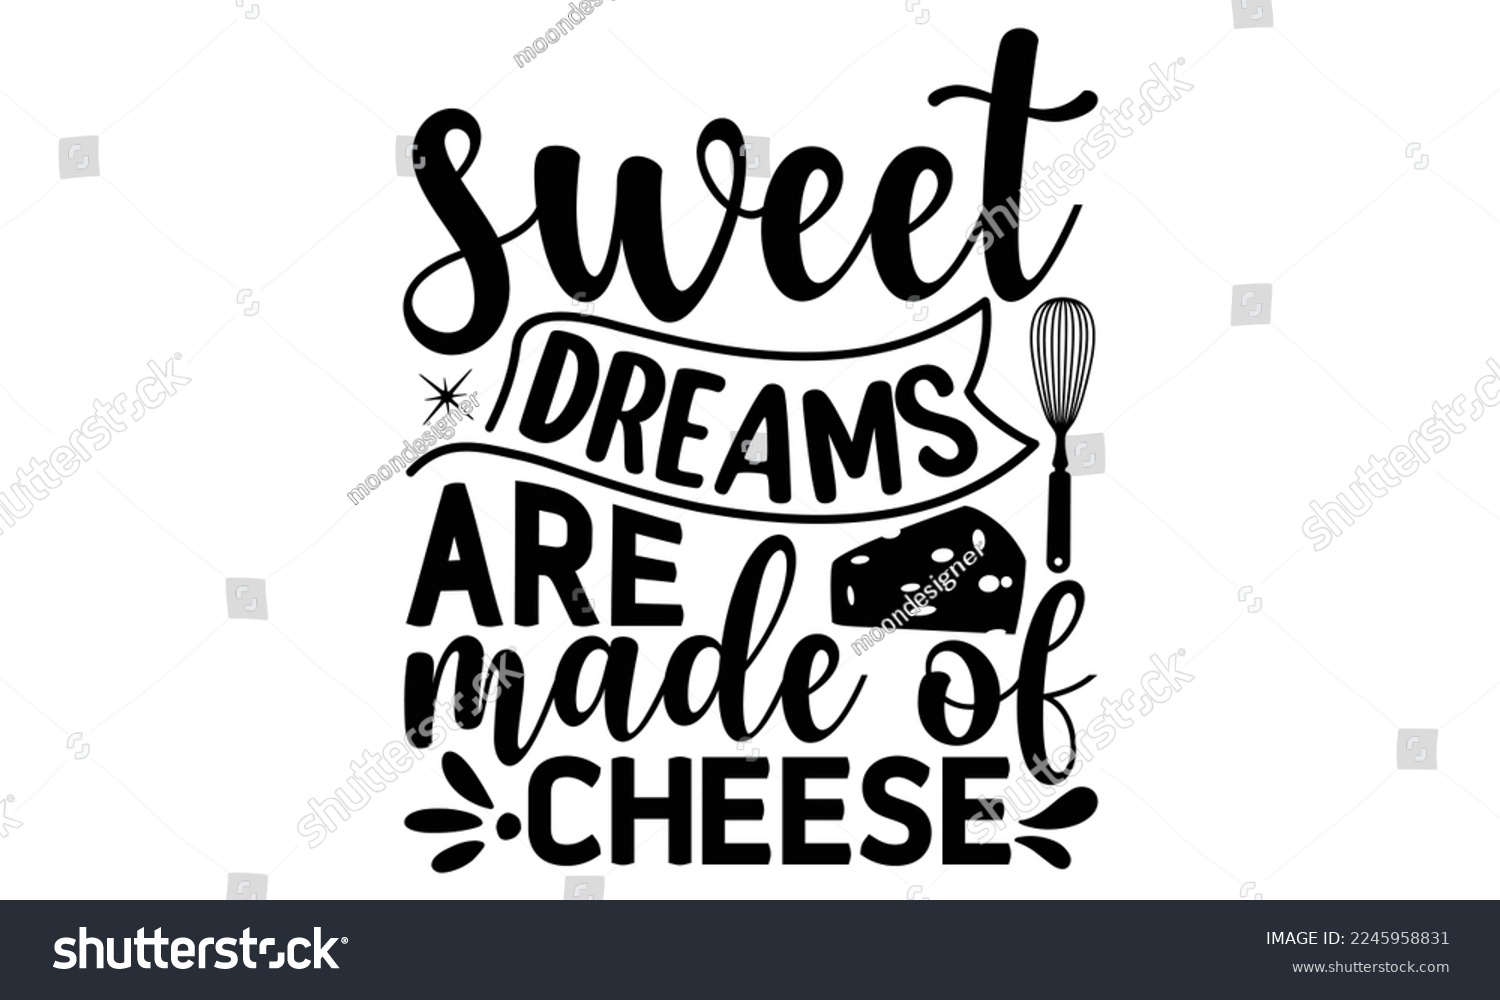 SVG of sweet dreams are made of cheese, cooking T shirt Design, Kitchen Sign, funny cooking Quotes, Hand drawn vintage illustration with hand-lettering and decoration elements, Cut Files for Cricut Svg and E svg